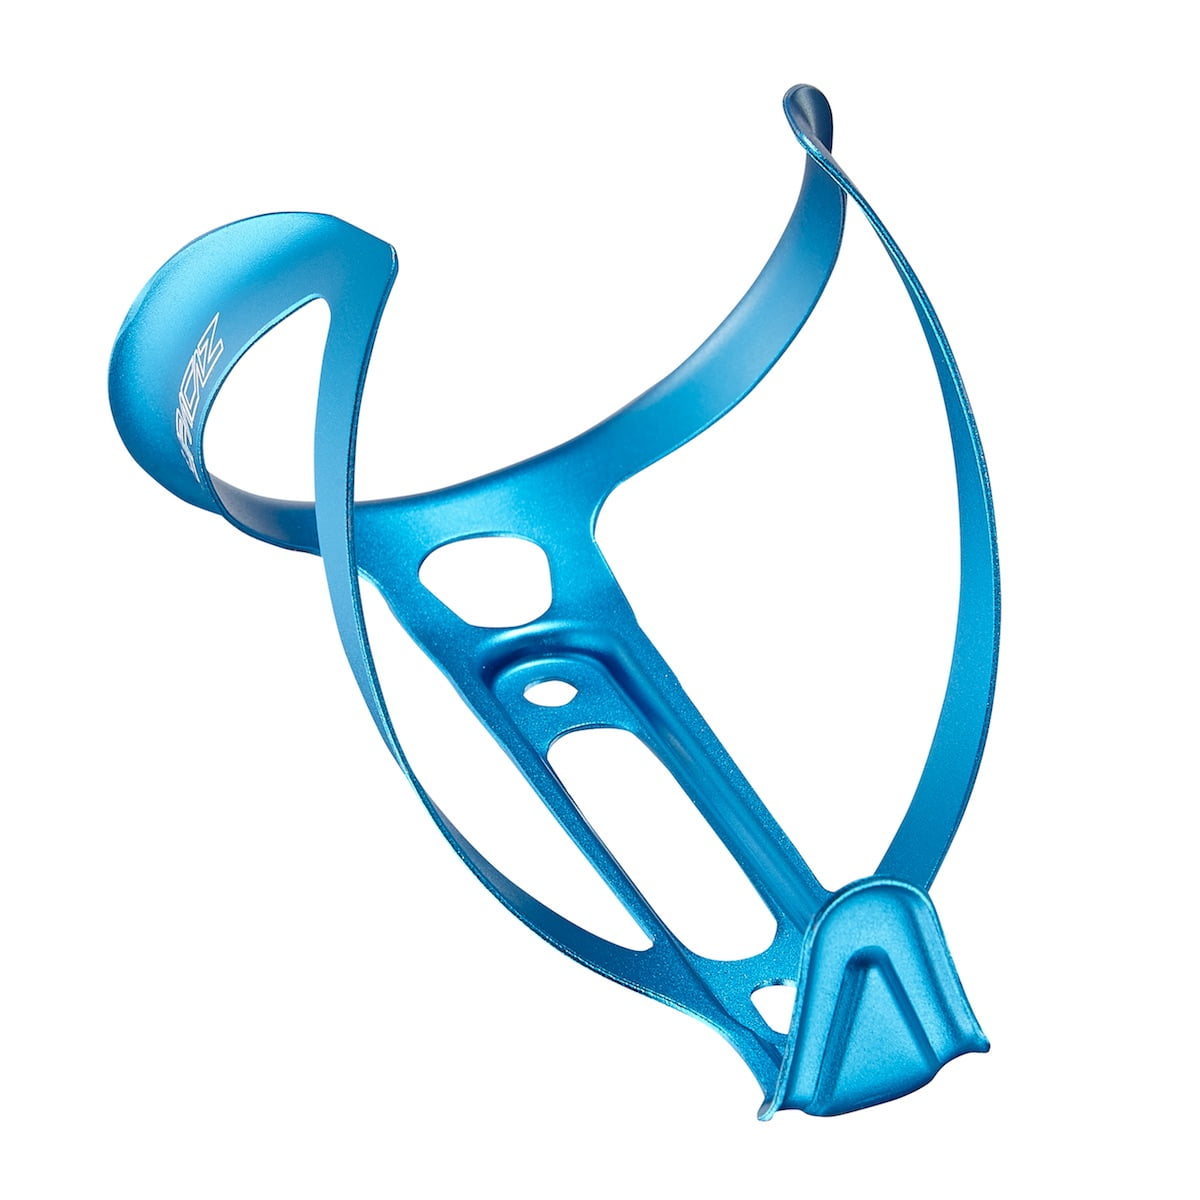 Supacaz Cycling Ano Fly Water Bottle Cage Aqua Blue